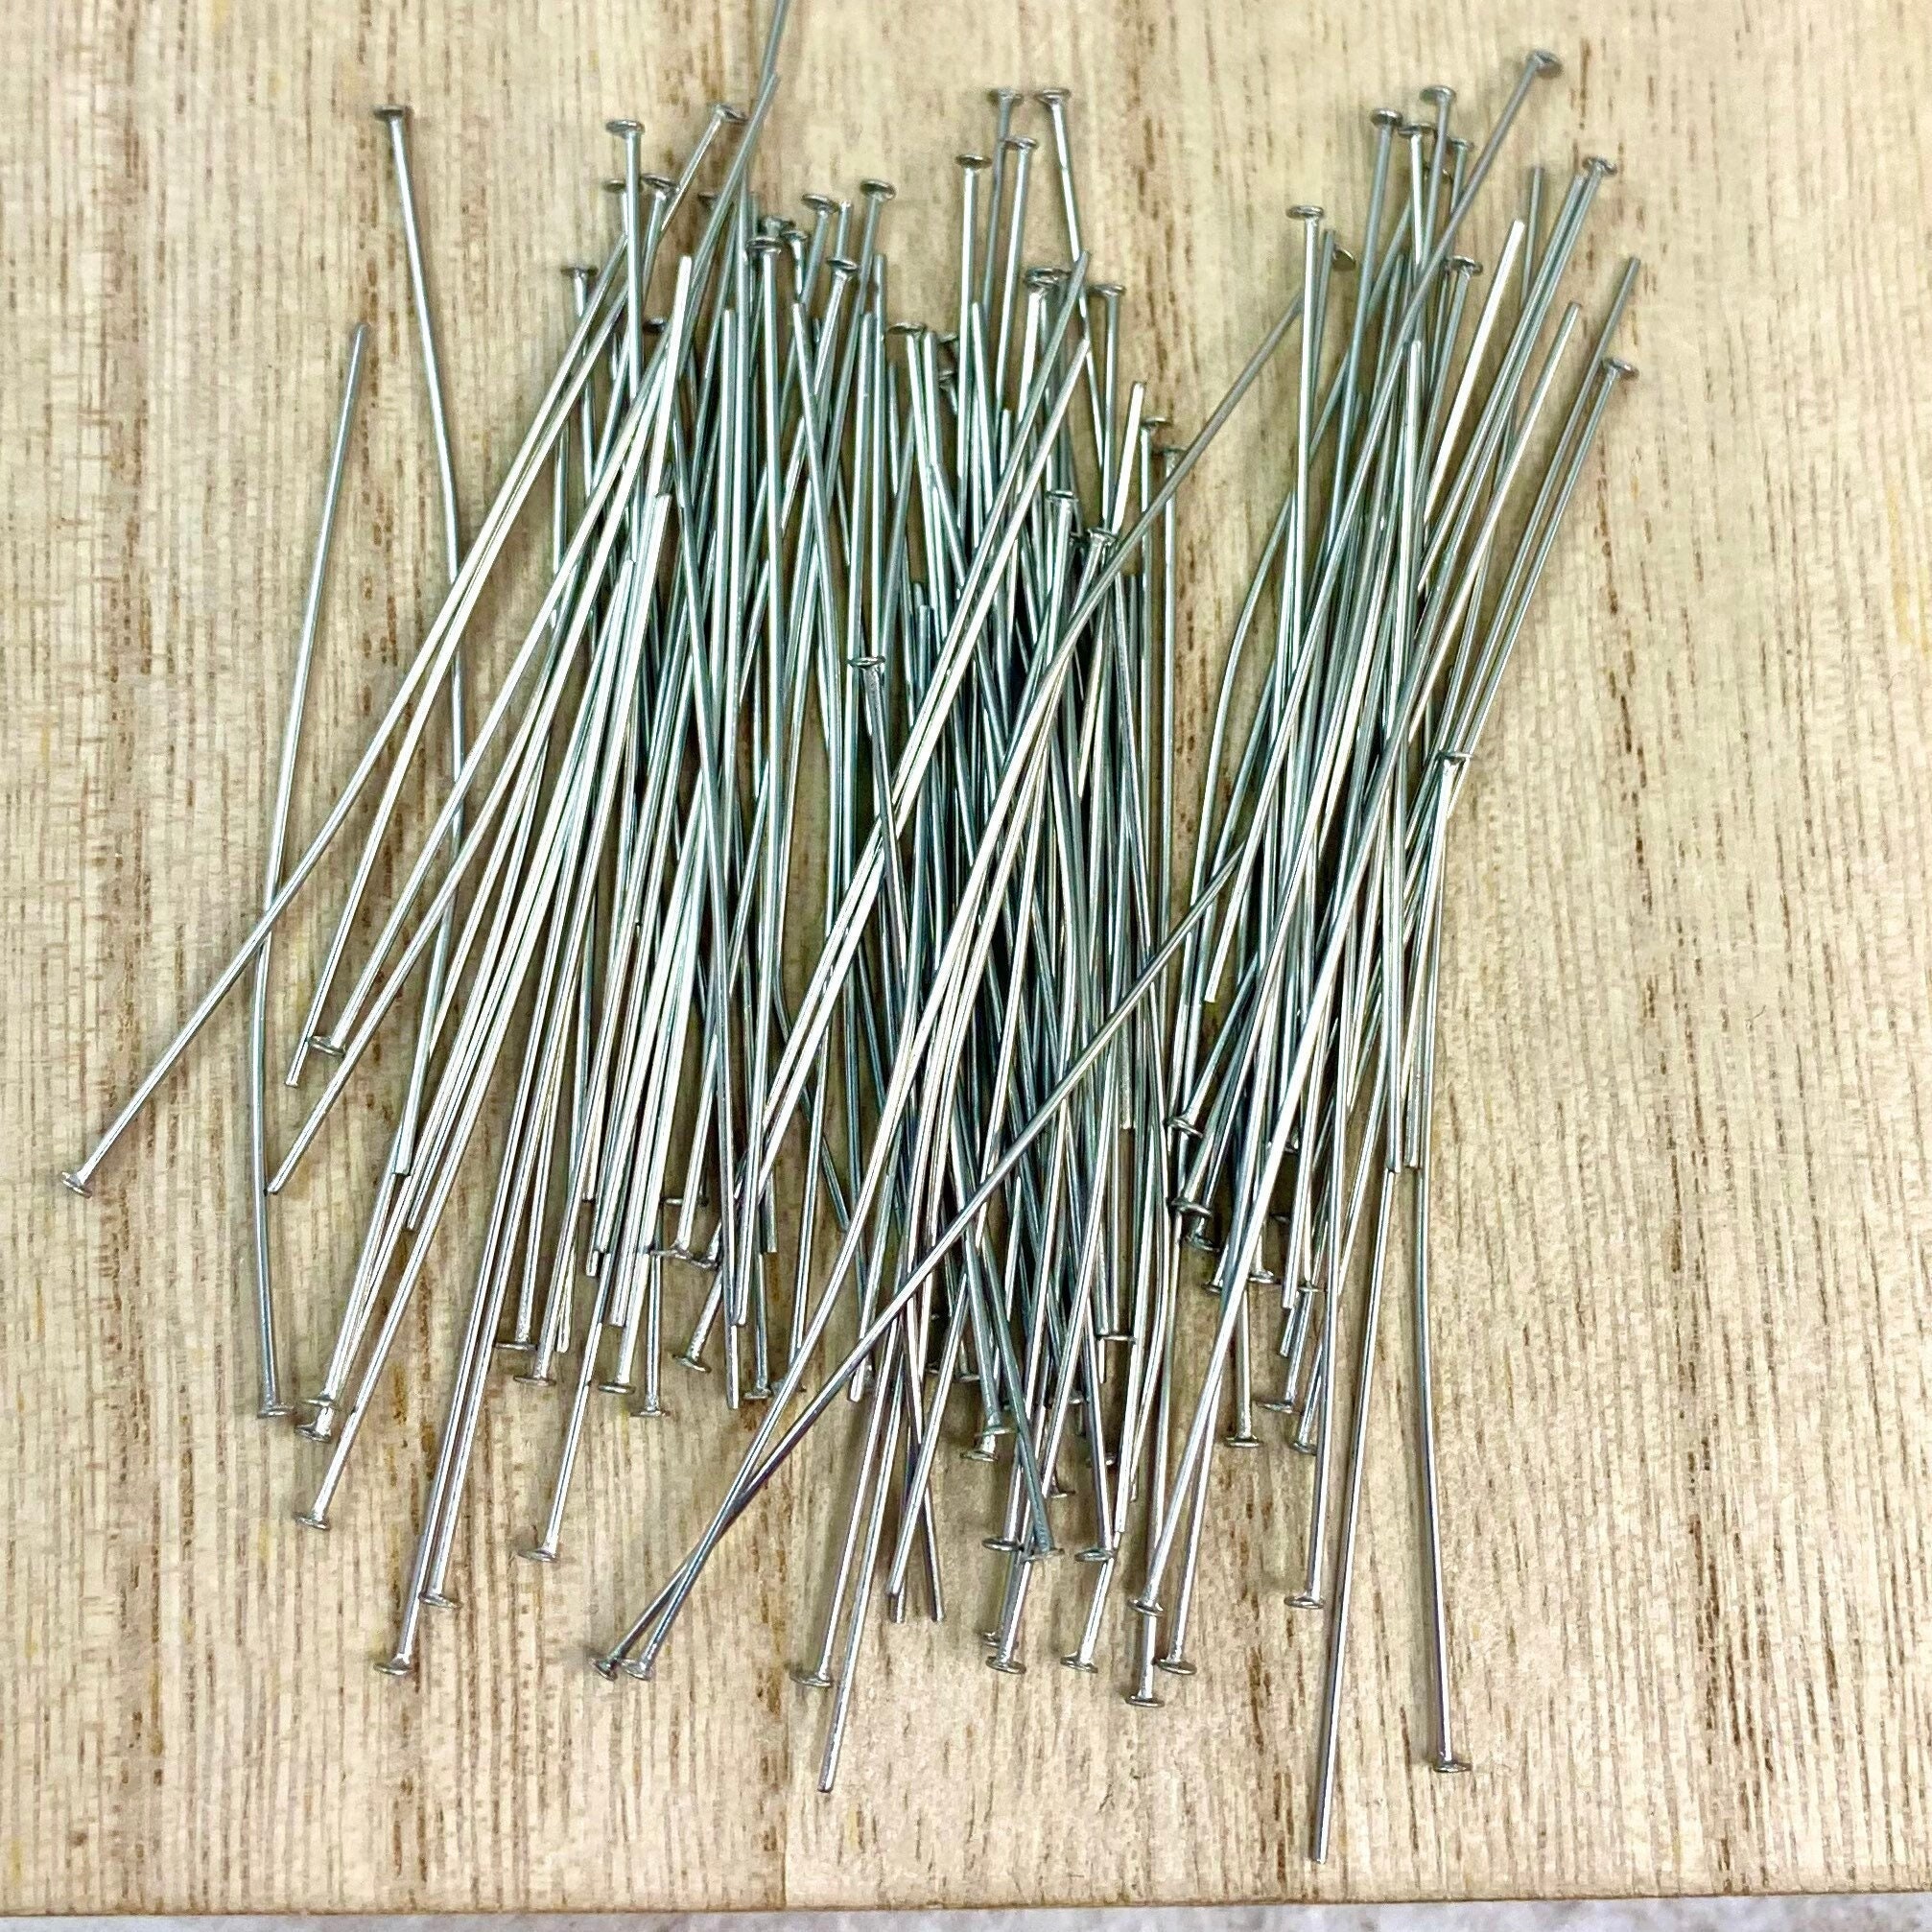 Mr. Pen- Sewing Pins 300 pcs Sewing Pins with Colored Heads Pins